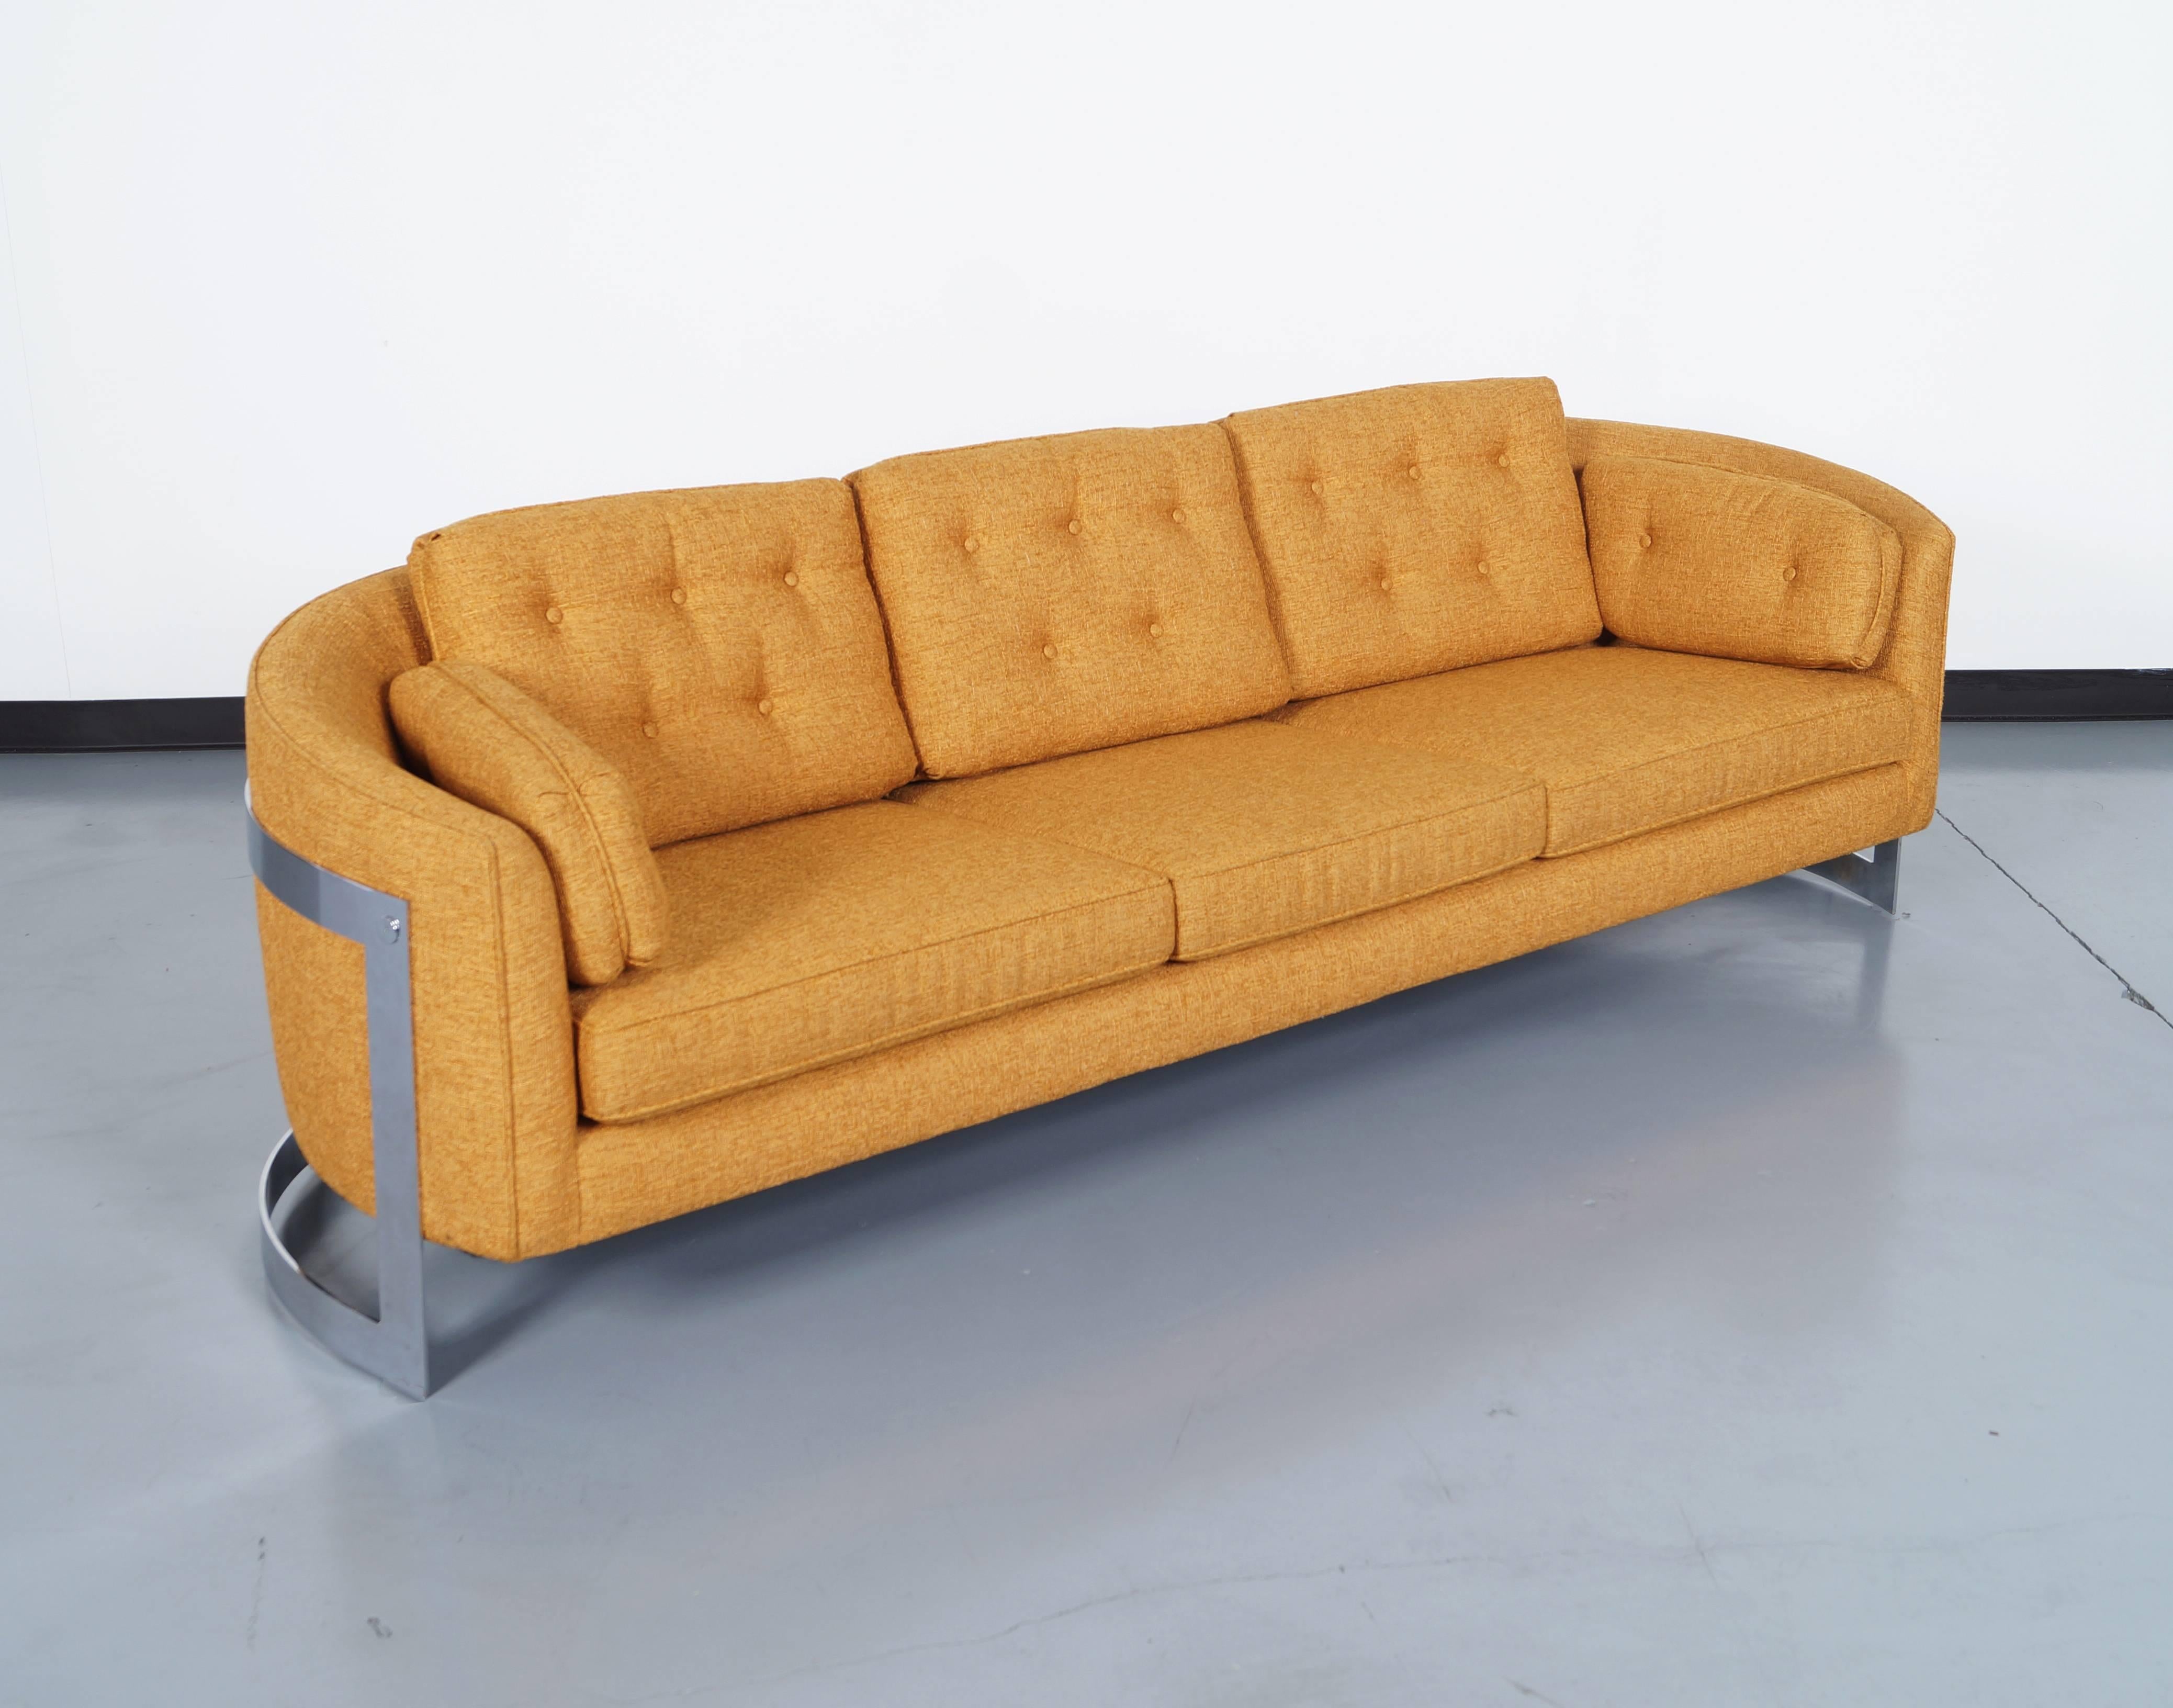 American Vintage Floating Chrome Sofa Attributed to Milo Baughman